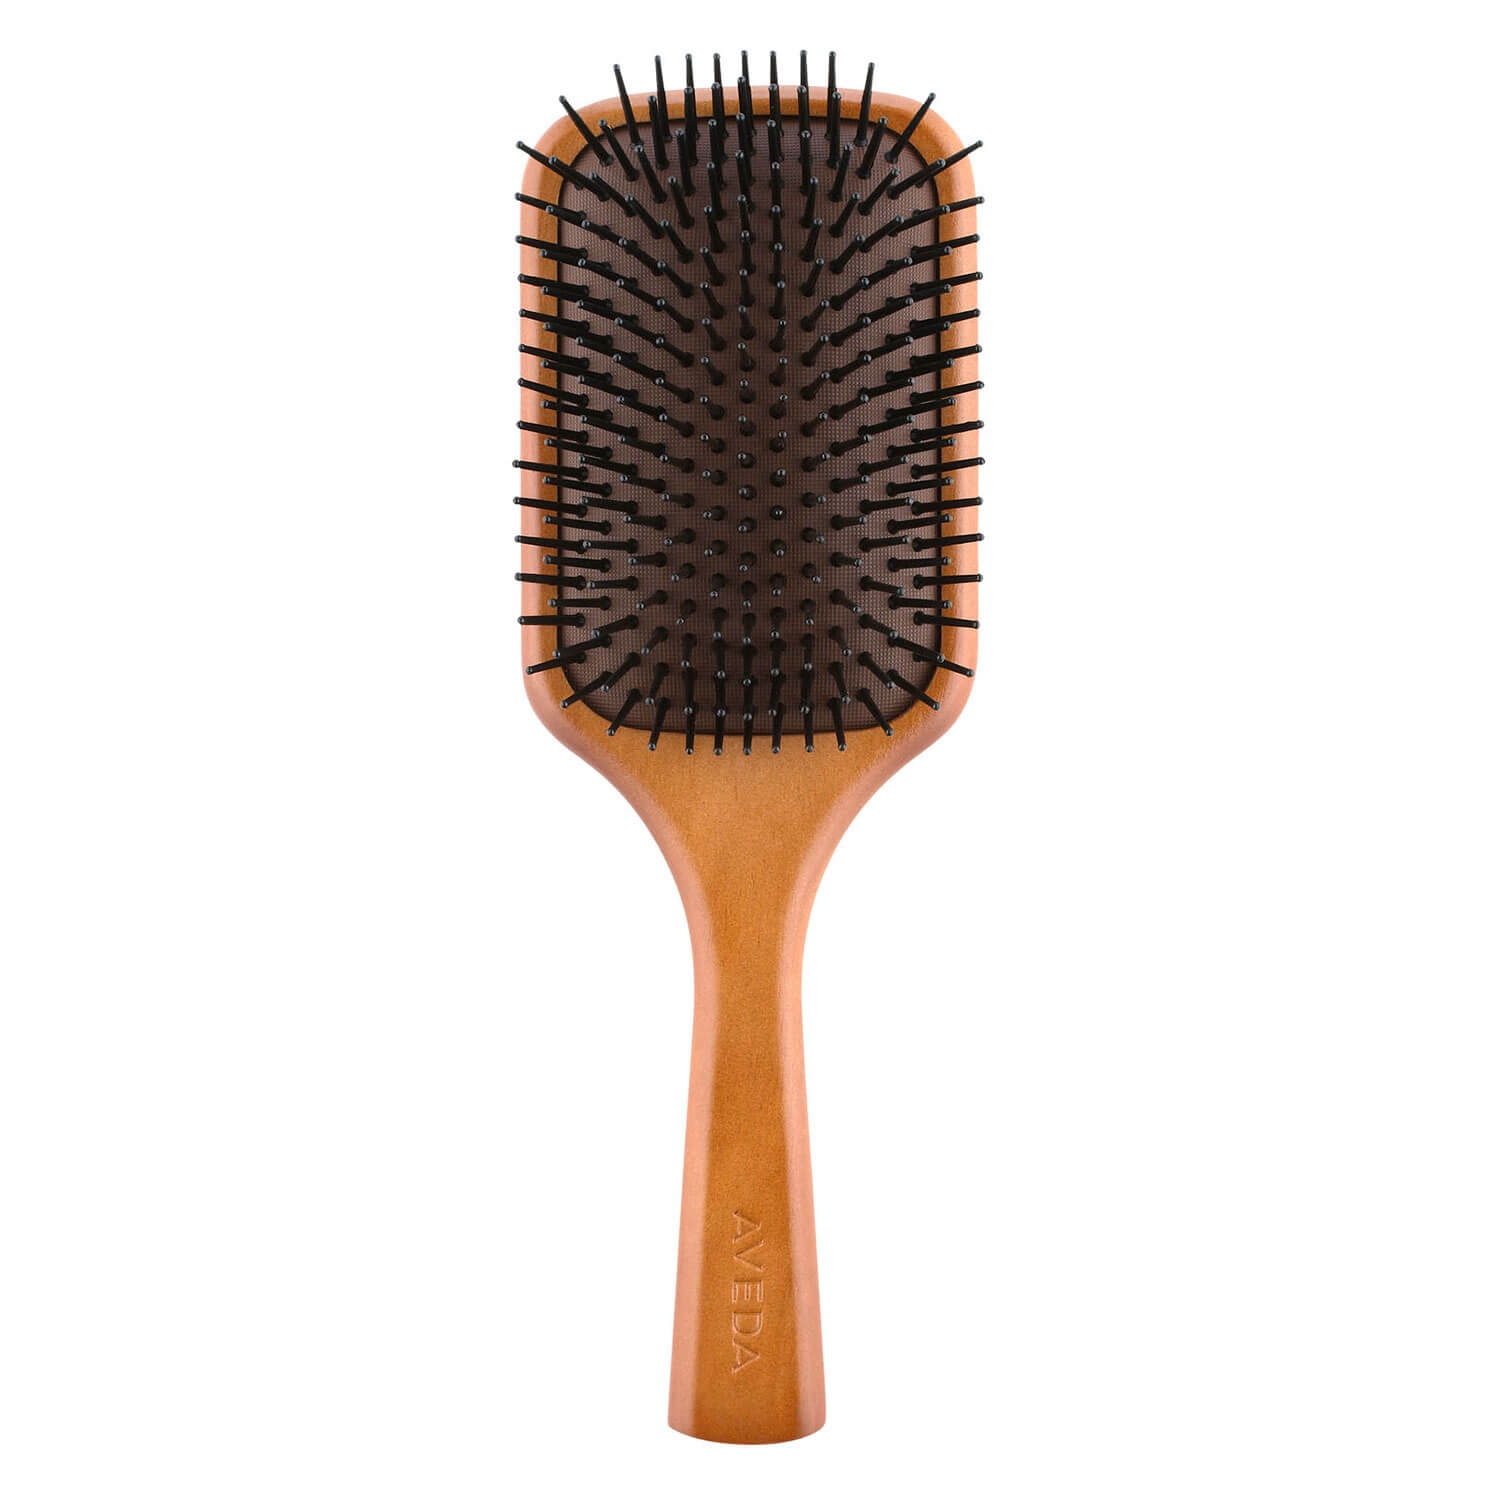 Product image from aveda tools - wooden paddle brush